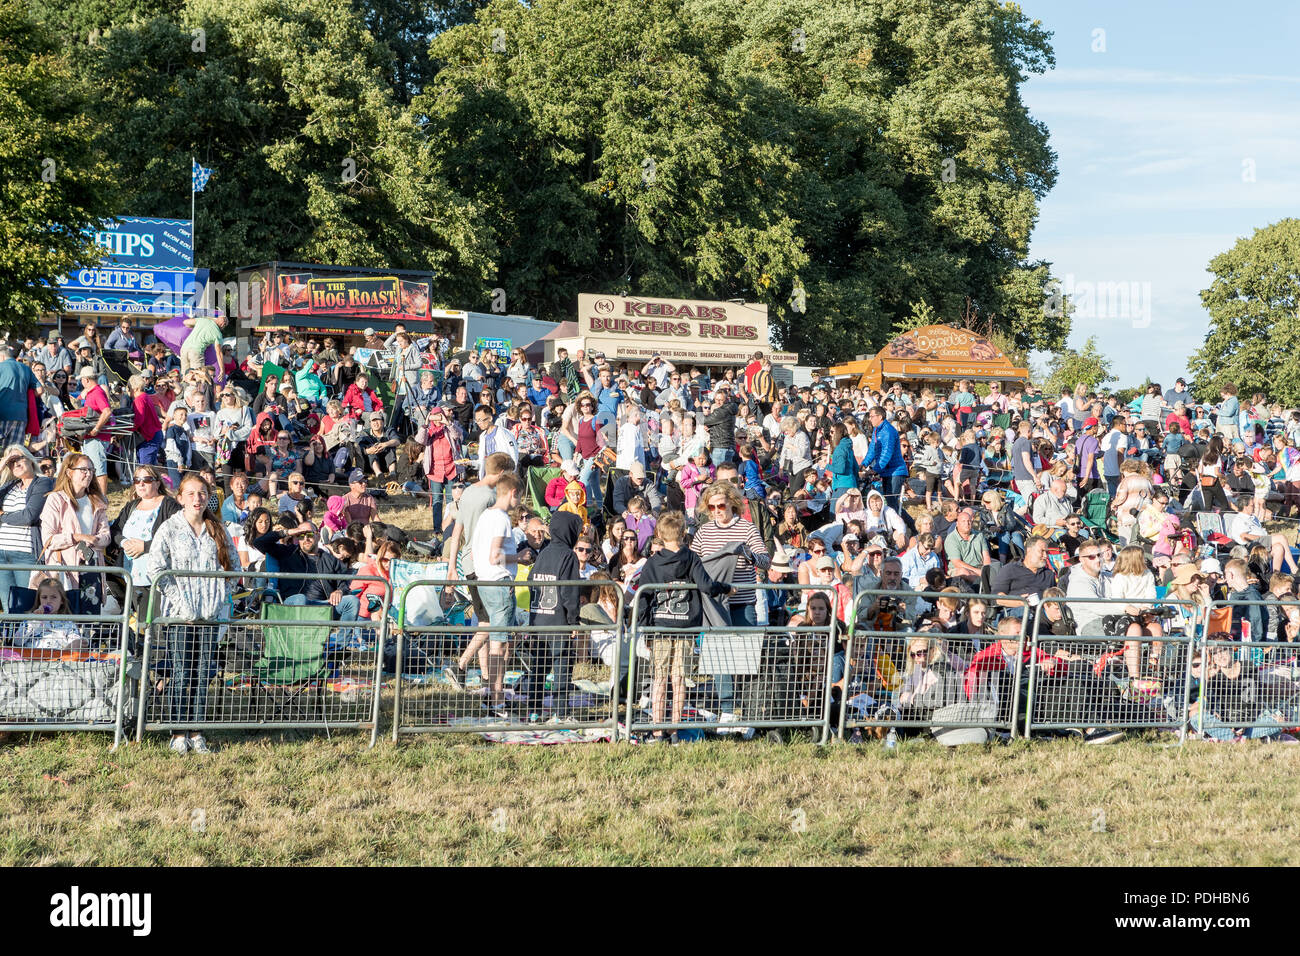 Ashton Court, Bristol, UK. 09 August 2018. Despite large crowds gathering in the sun at Ashton Court for the Special Shaped Balloon launch, the winds proved to be too strong to permit the balloons to fly safely. Organisers are hoping for better flying condition on Friday morning’s first mass launch celebrating 40 years of the fiesta.  Neil Cordell/Alamy Live News Stock Photo